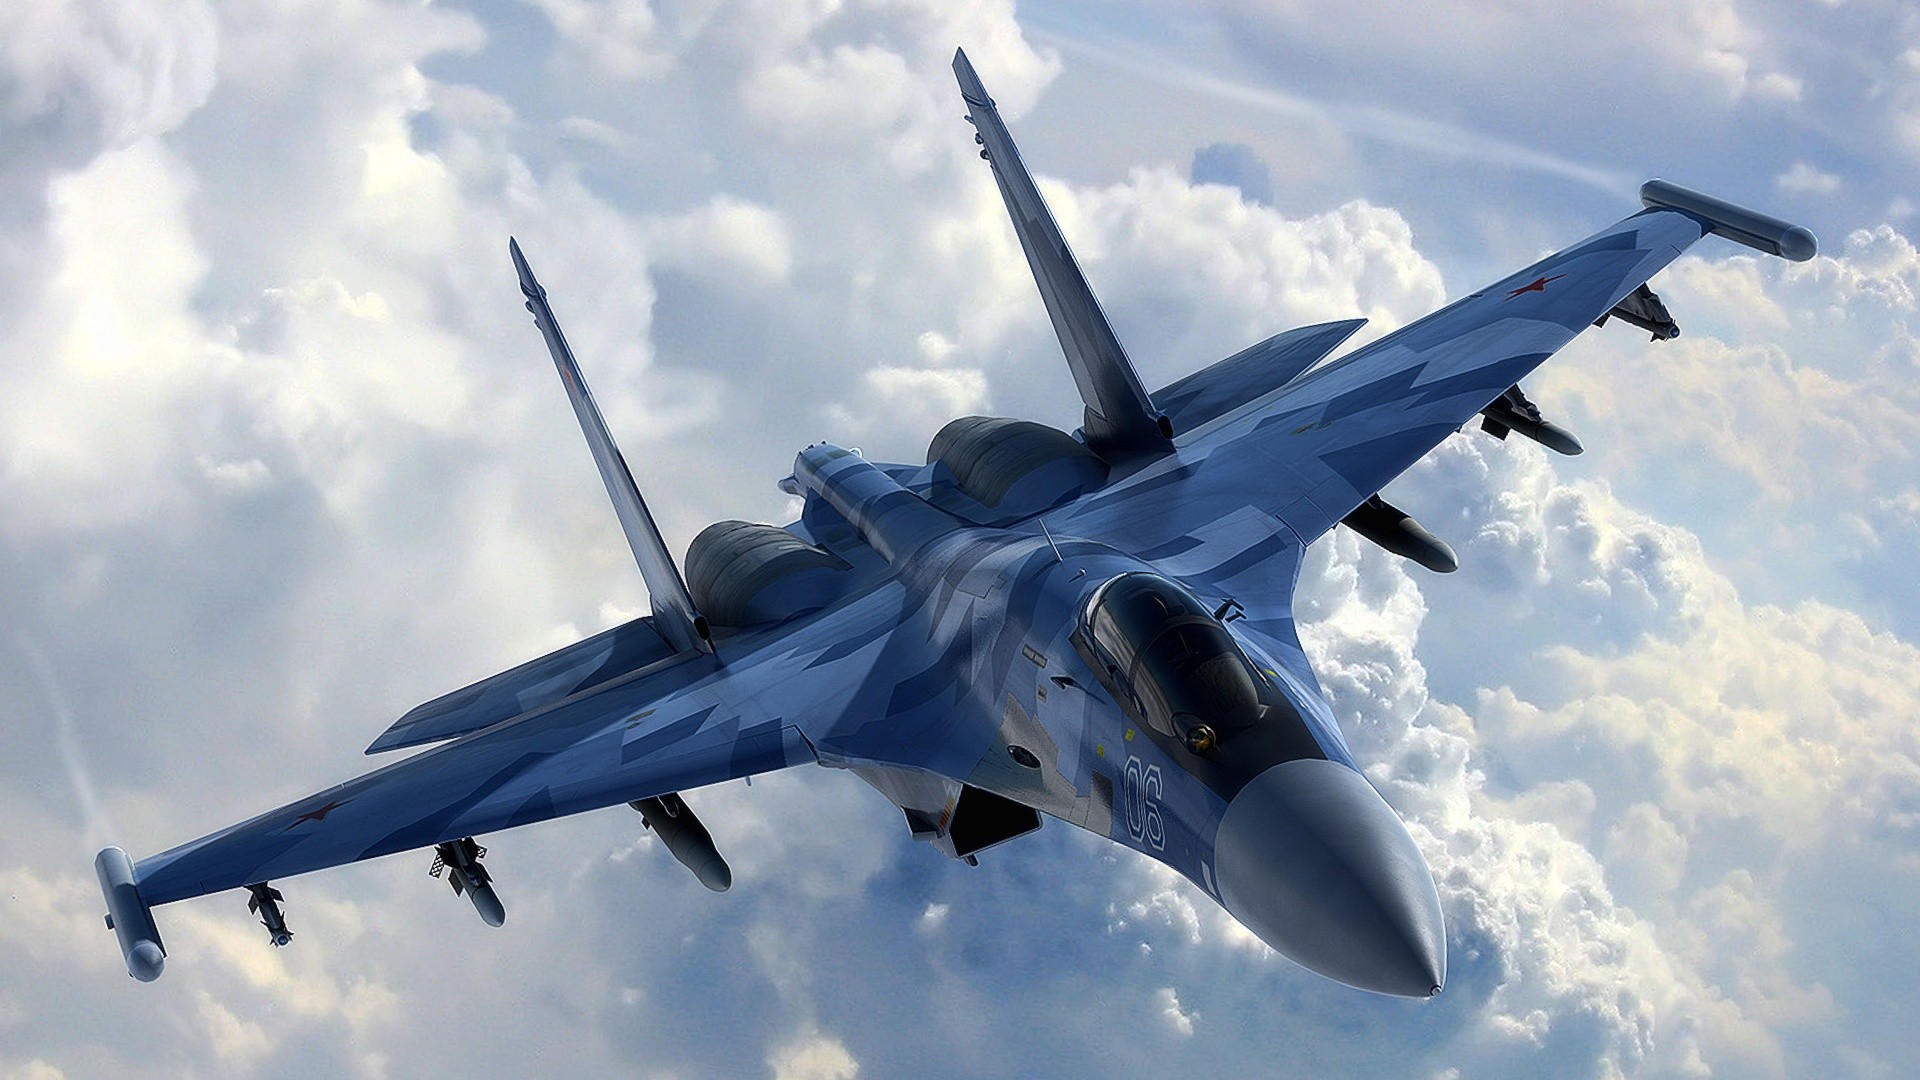 Aircraft Air Superiority Fighter Fighters Jet Military Sukhoi Su 35 1920x1080